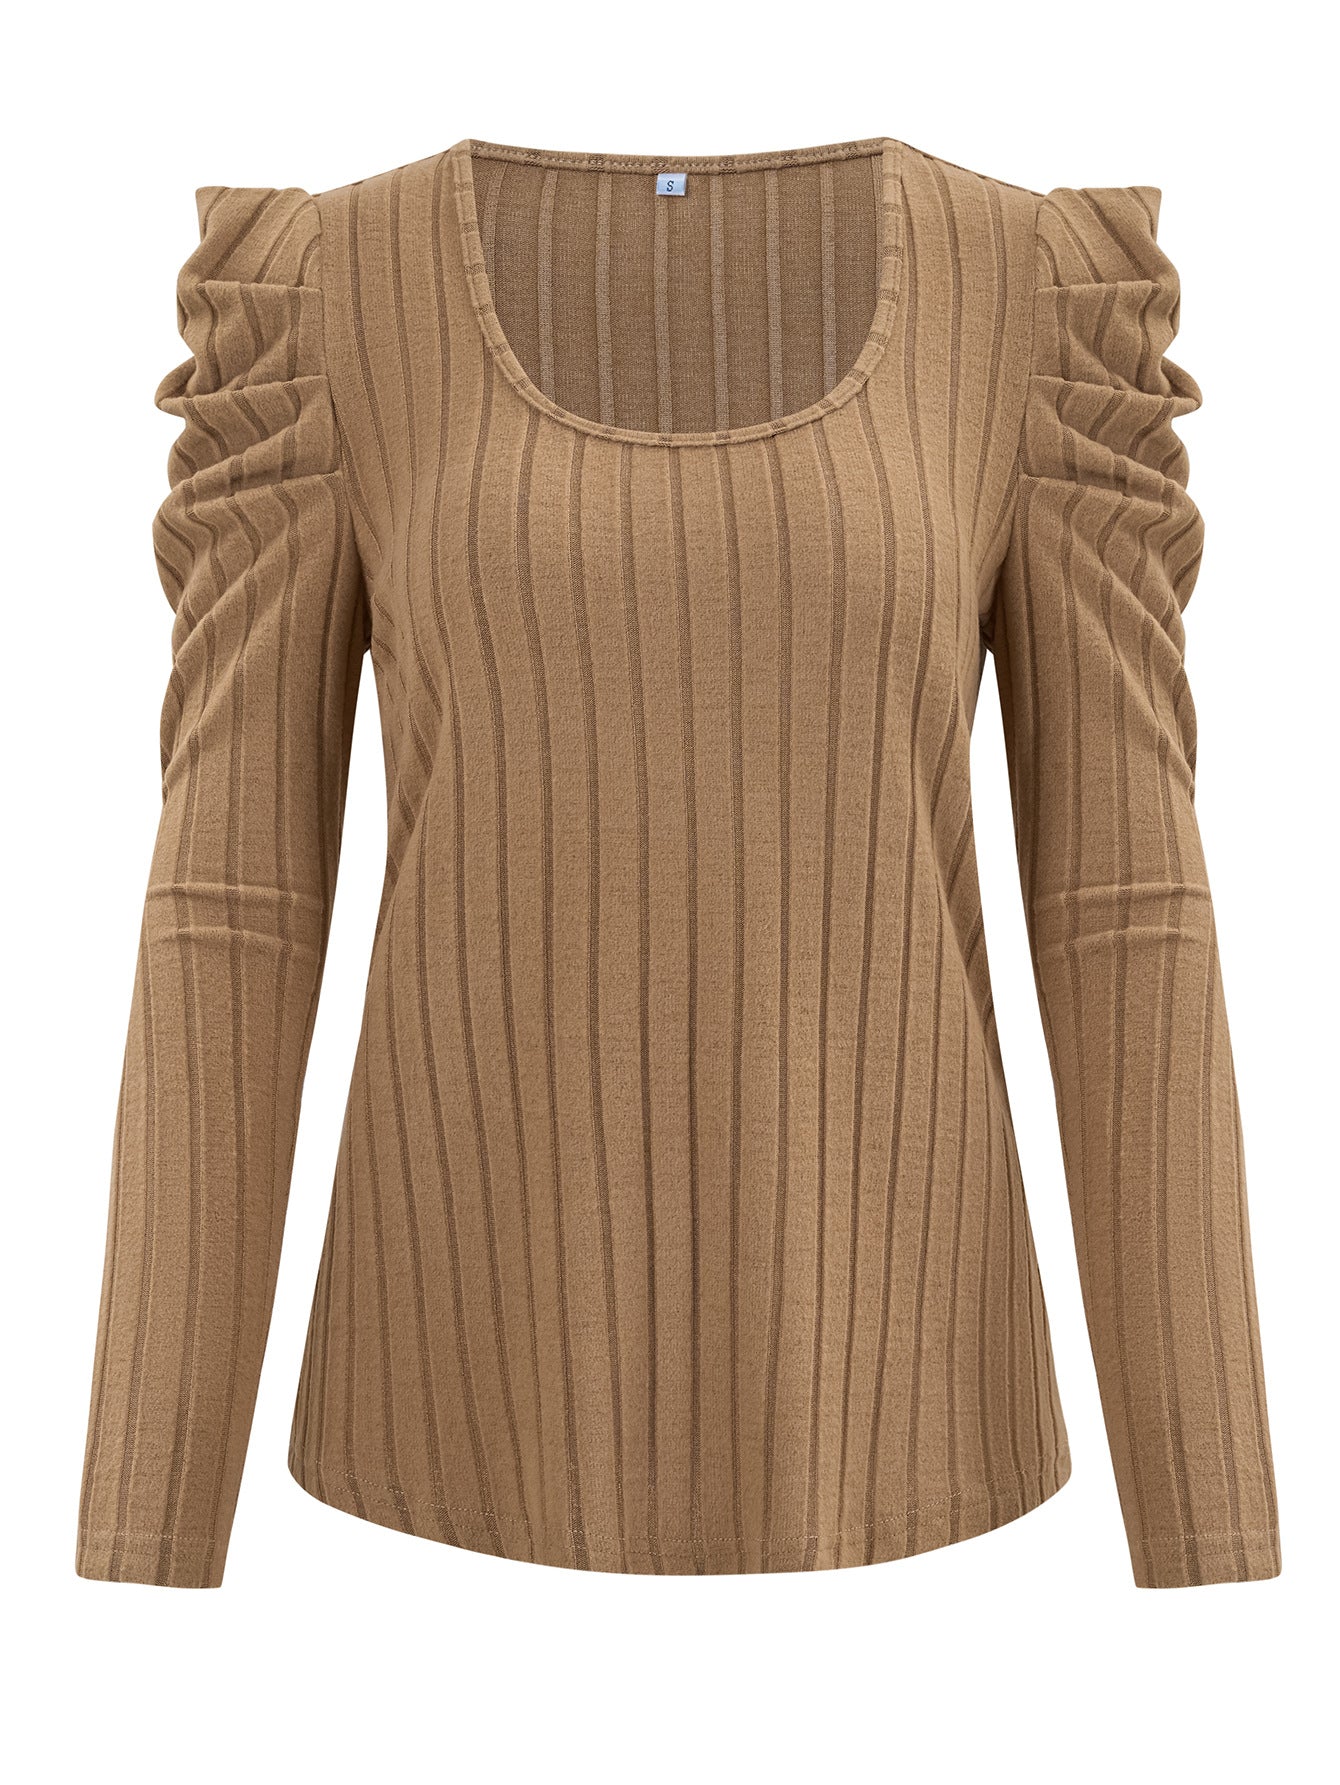 BamBam Autumn And Winter Fashionable Women's Casual Square-Neck Slim Long-Sleeved Knitting Top - BamBam